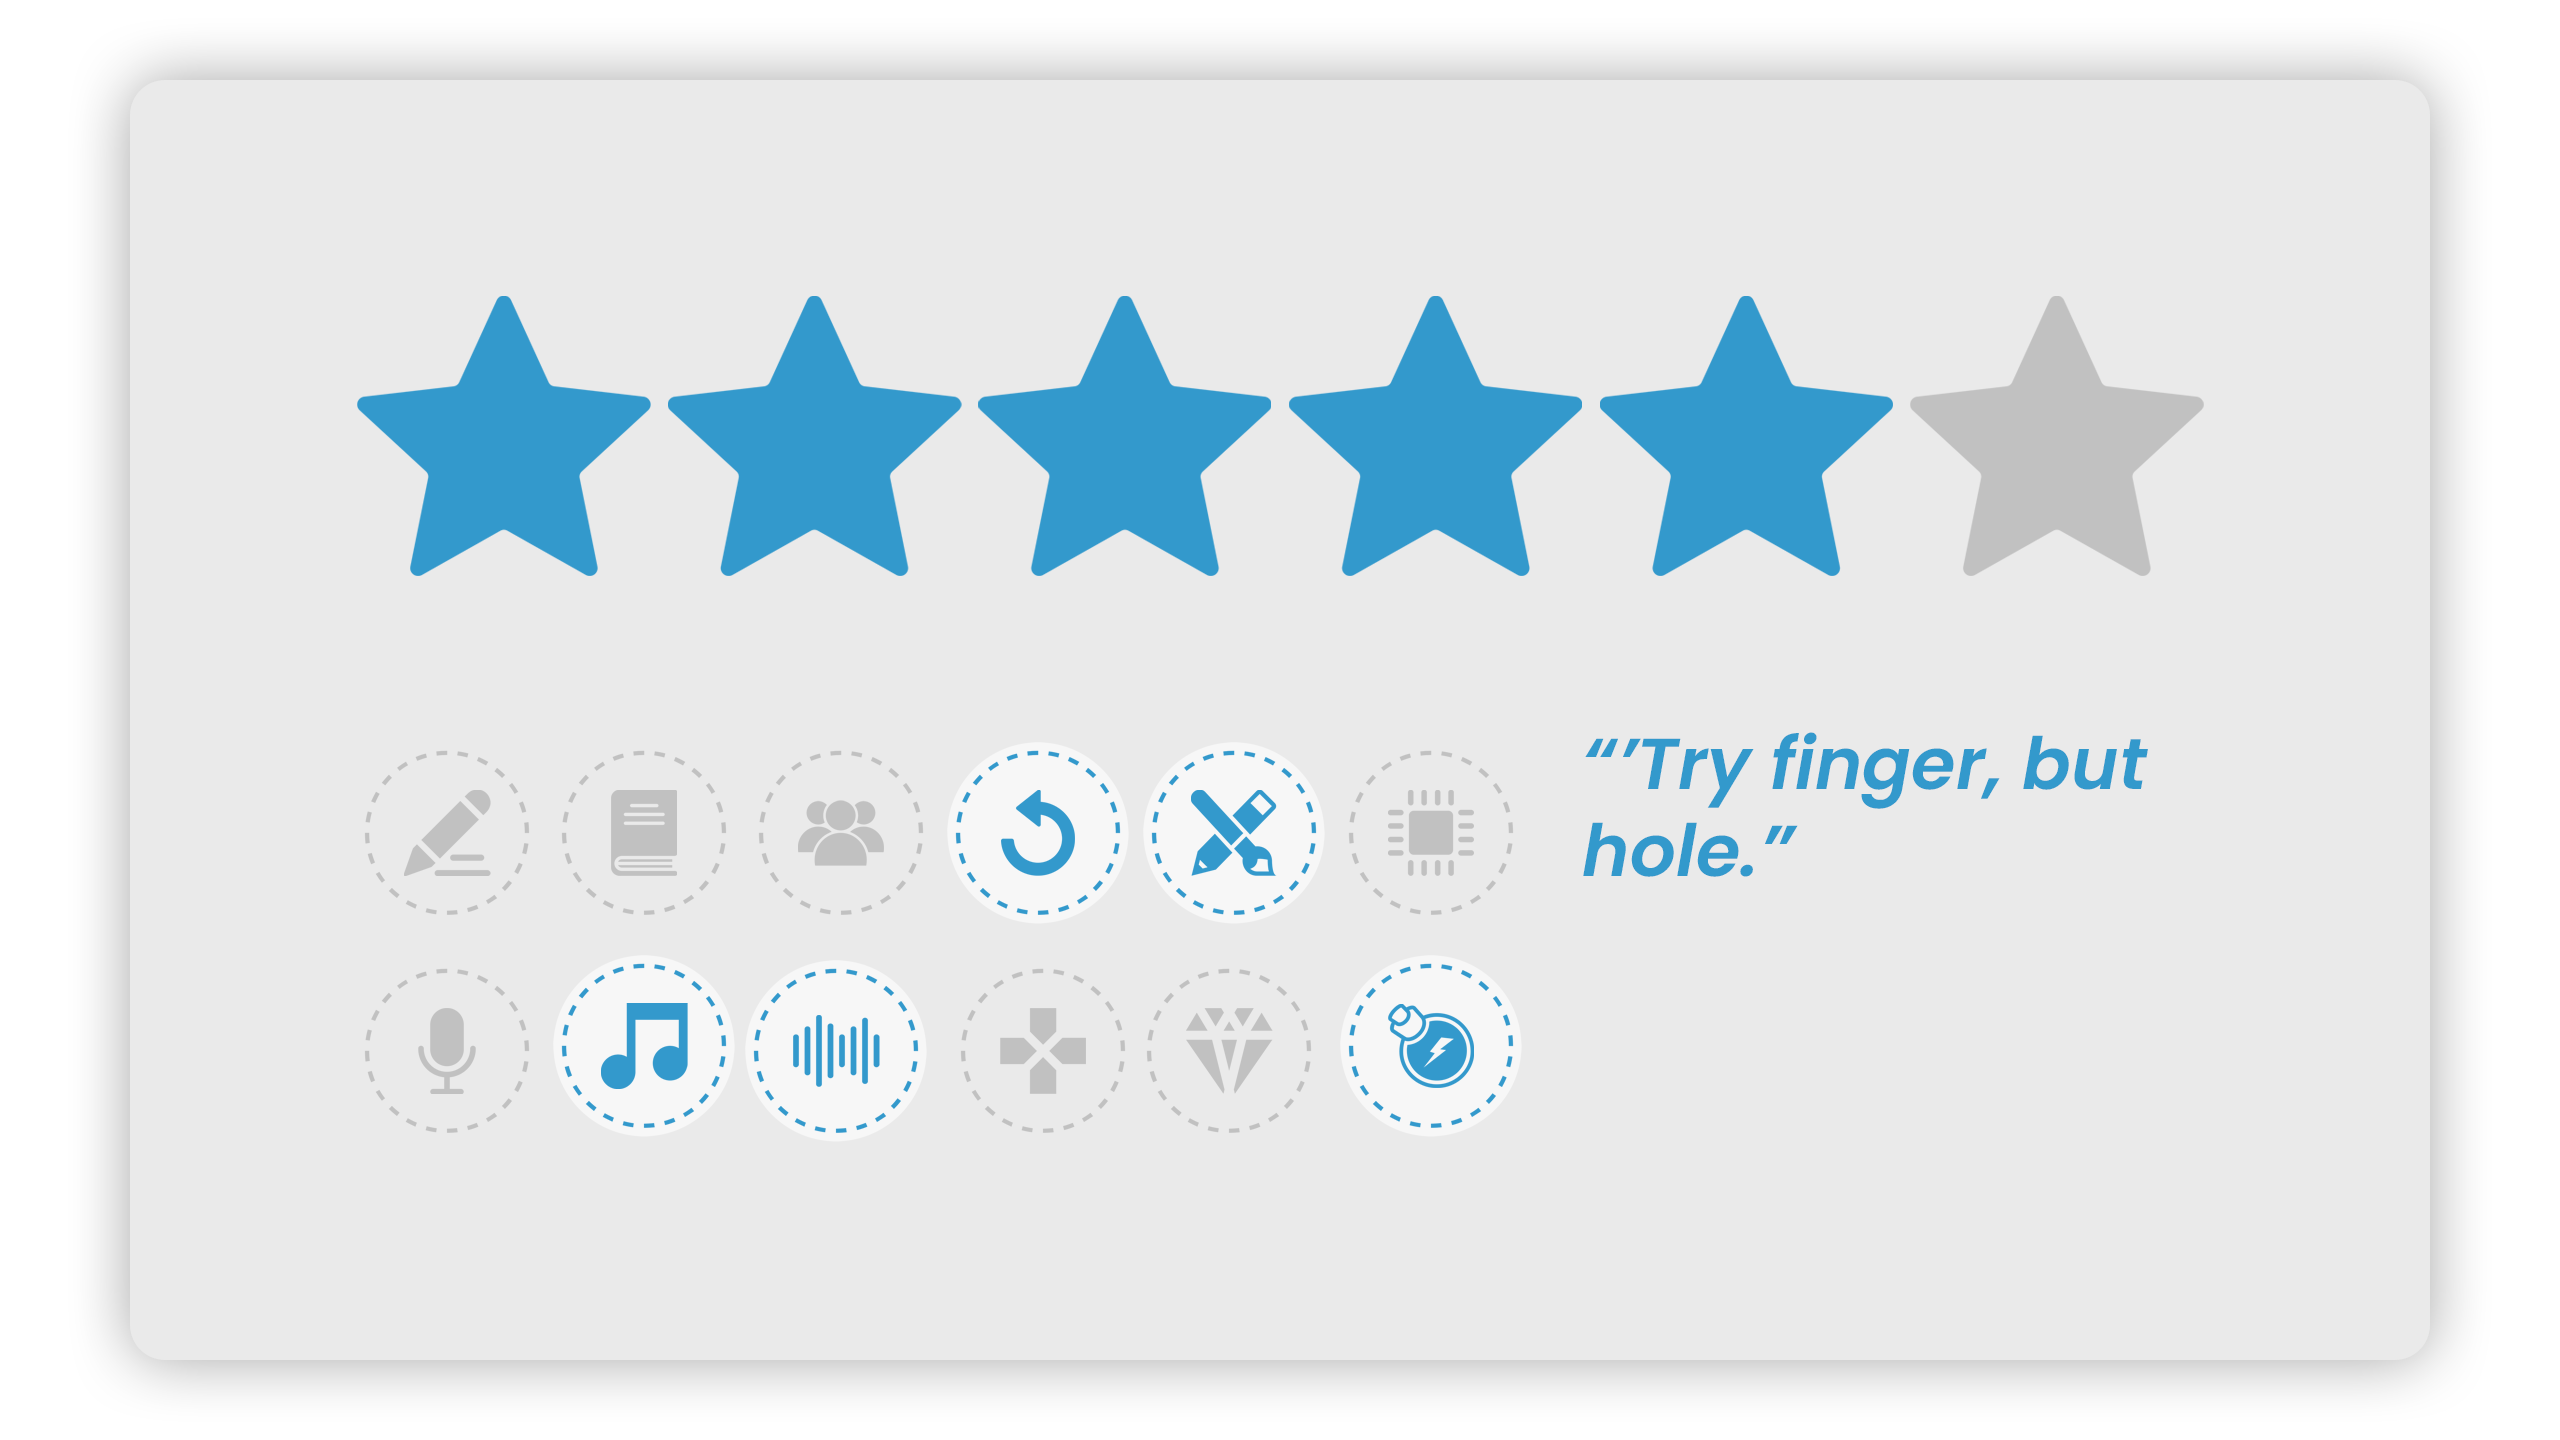 Elden Ring Review. Five Stars. Badges for Replayability, Art Direction, Soundtrack, Sound Design, and Special Sauce.